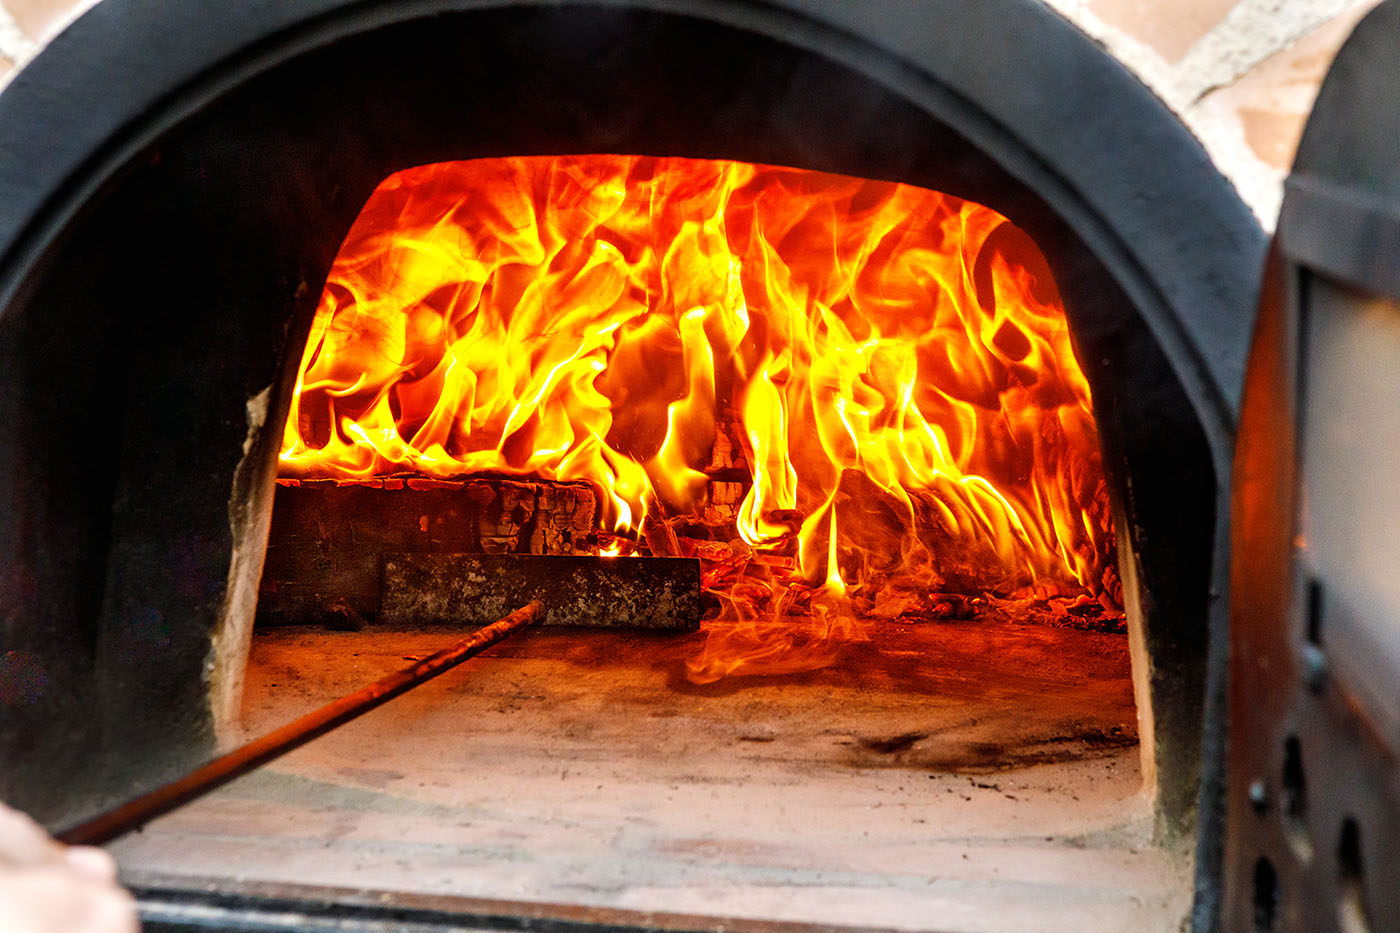 https://www.fuegowoodfiredovens.com/wp-content/uploads/2018/08/how-to-light-your-wood-fired-pizza-oven-8.jpg